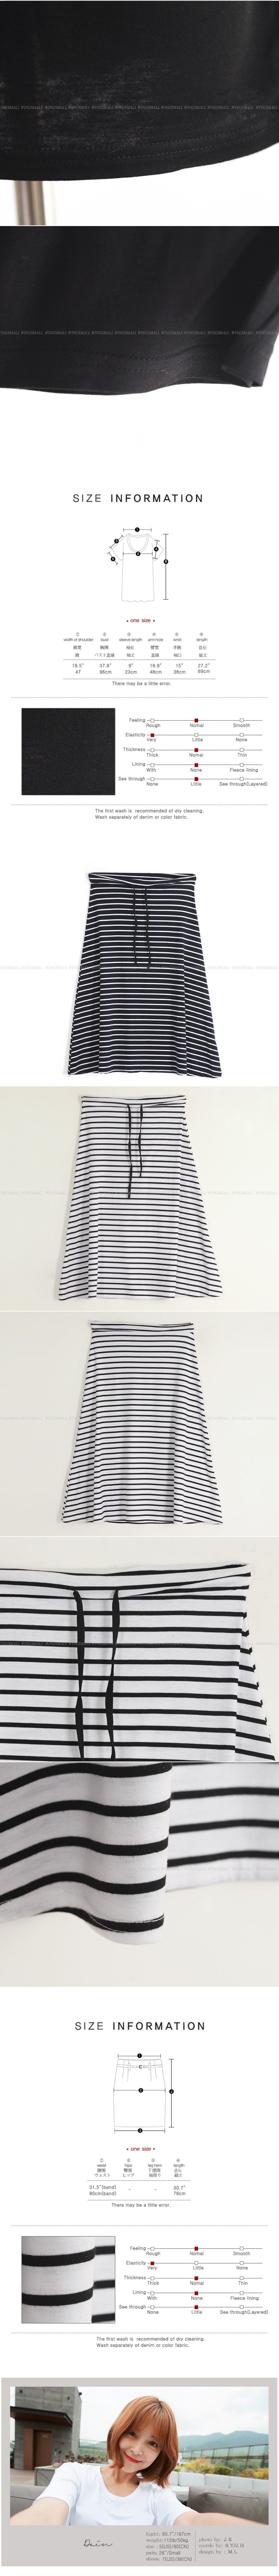 [Special Offer] Soft U-neck Loose T-shirt and Striped A-Line String Skirt 2pieces Set #Black+Ivory One Size(Free